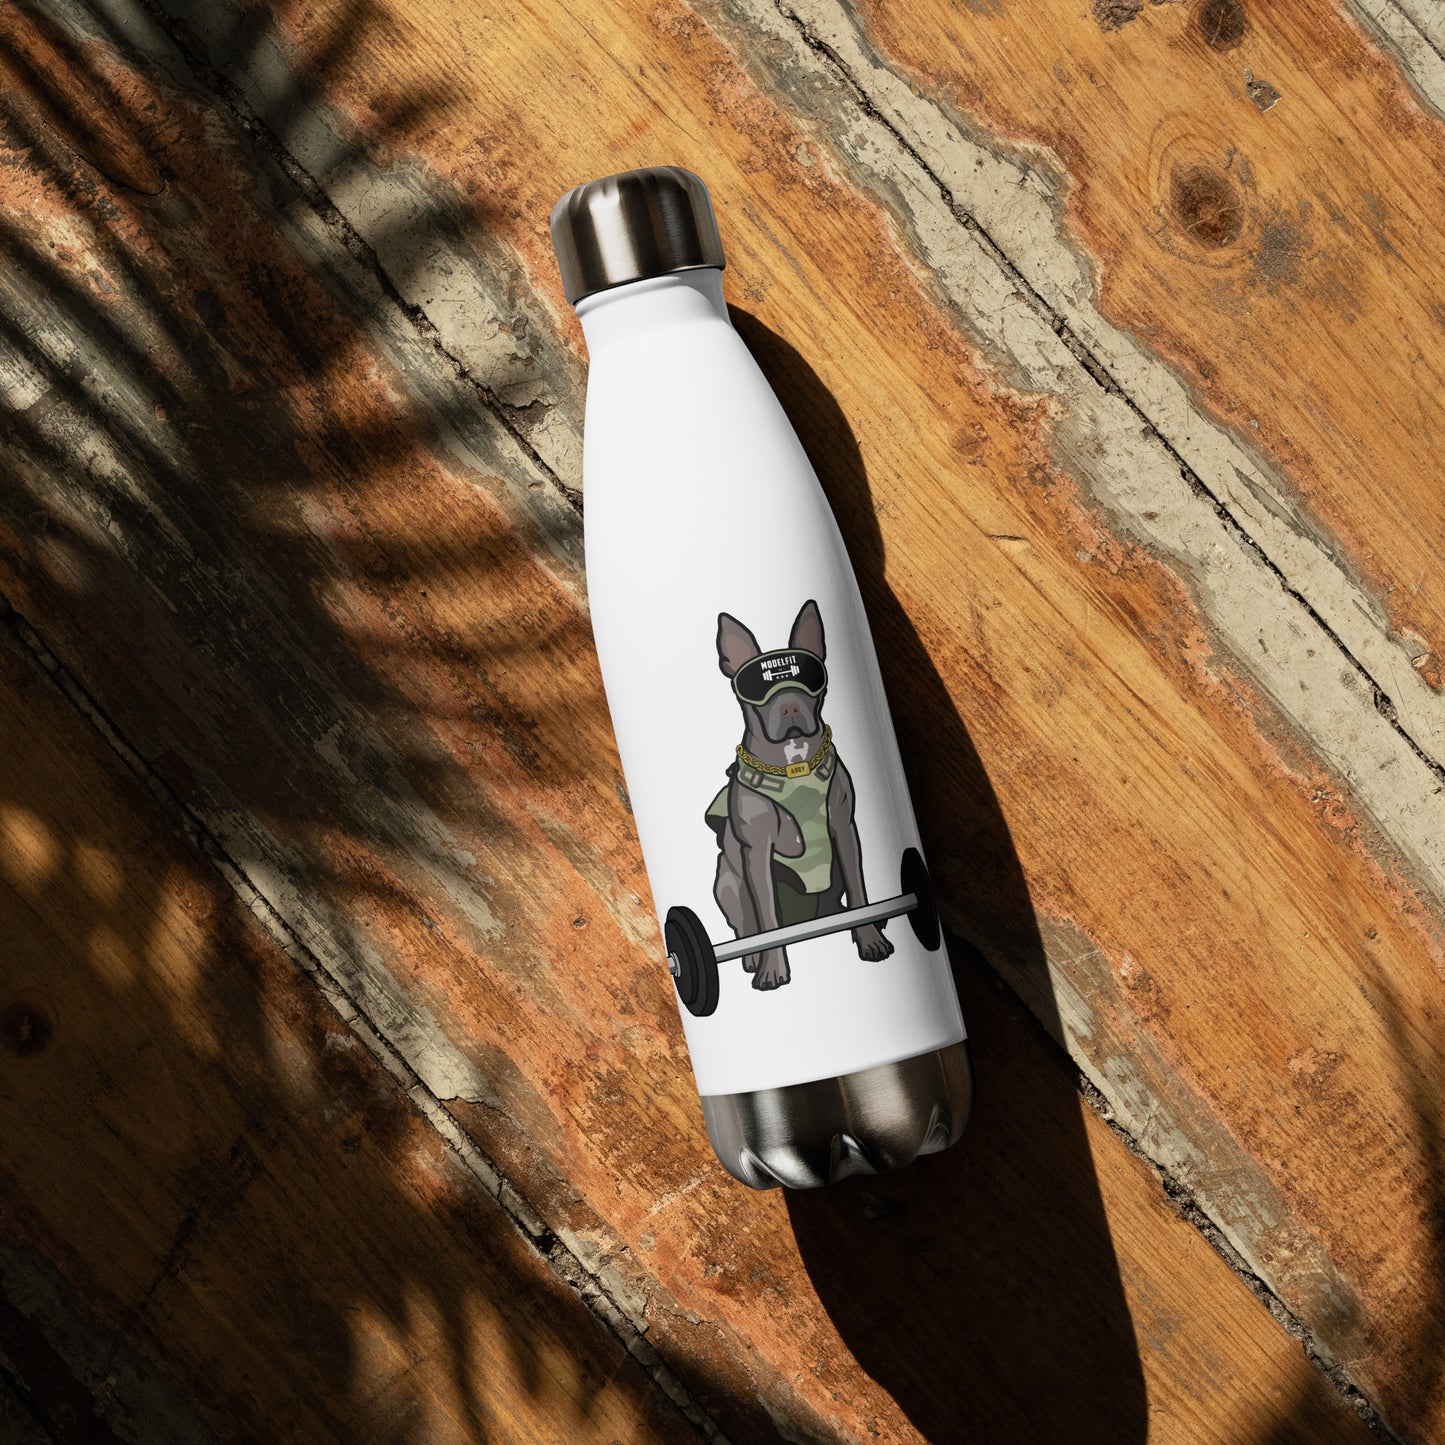 The BEEFCAKE ABBY Stainless steel water bottle